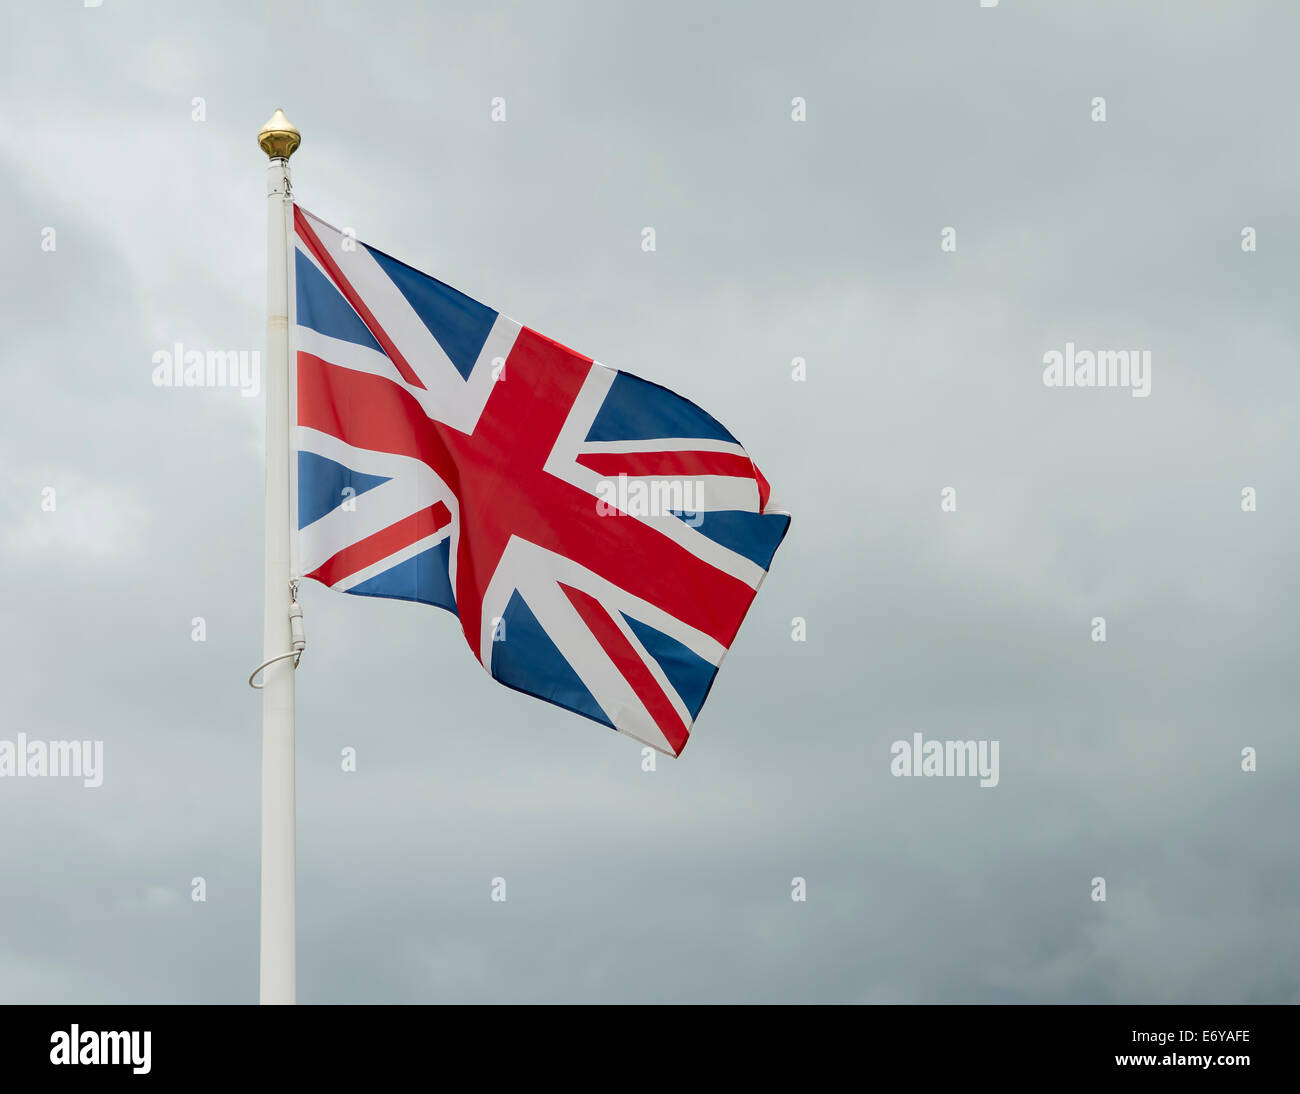 Great Britain flag against stormy sky Stock Photo